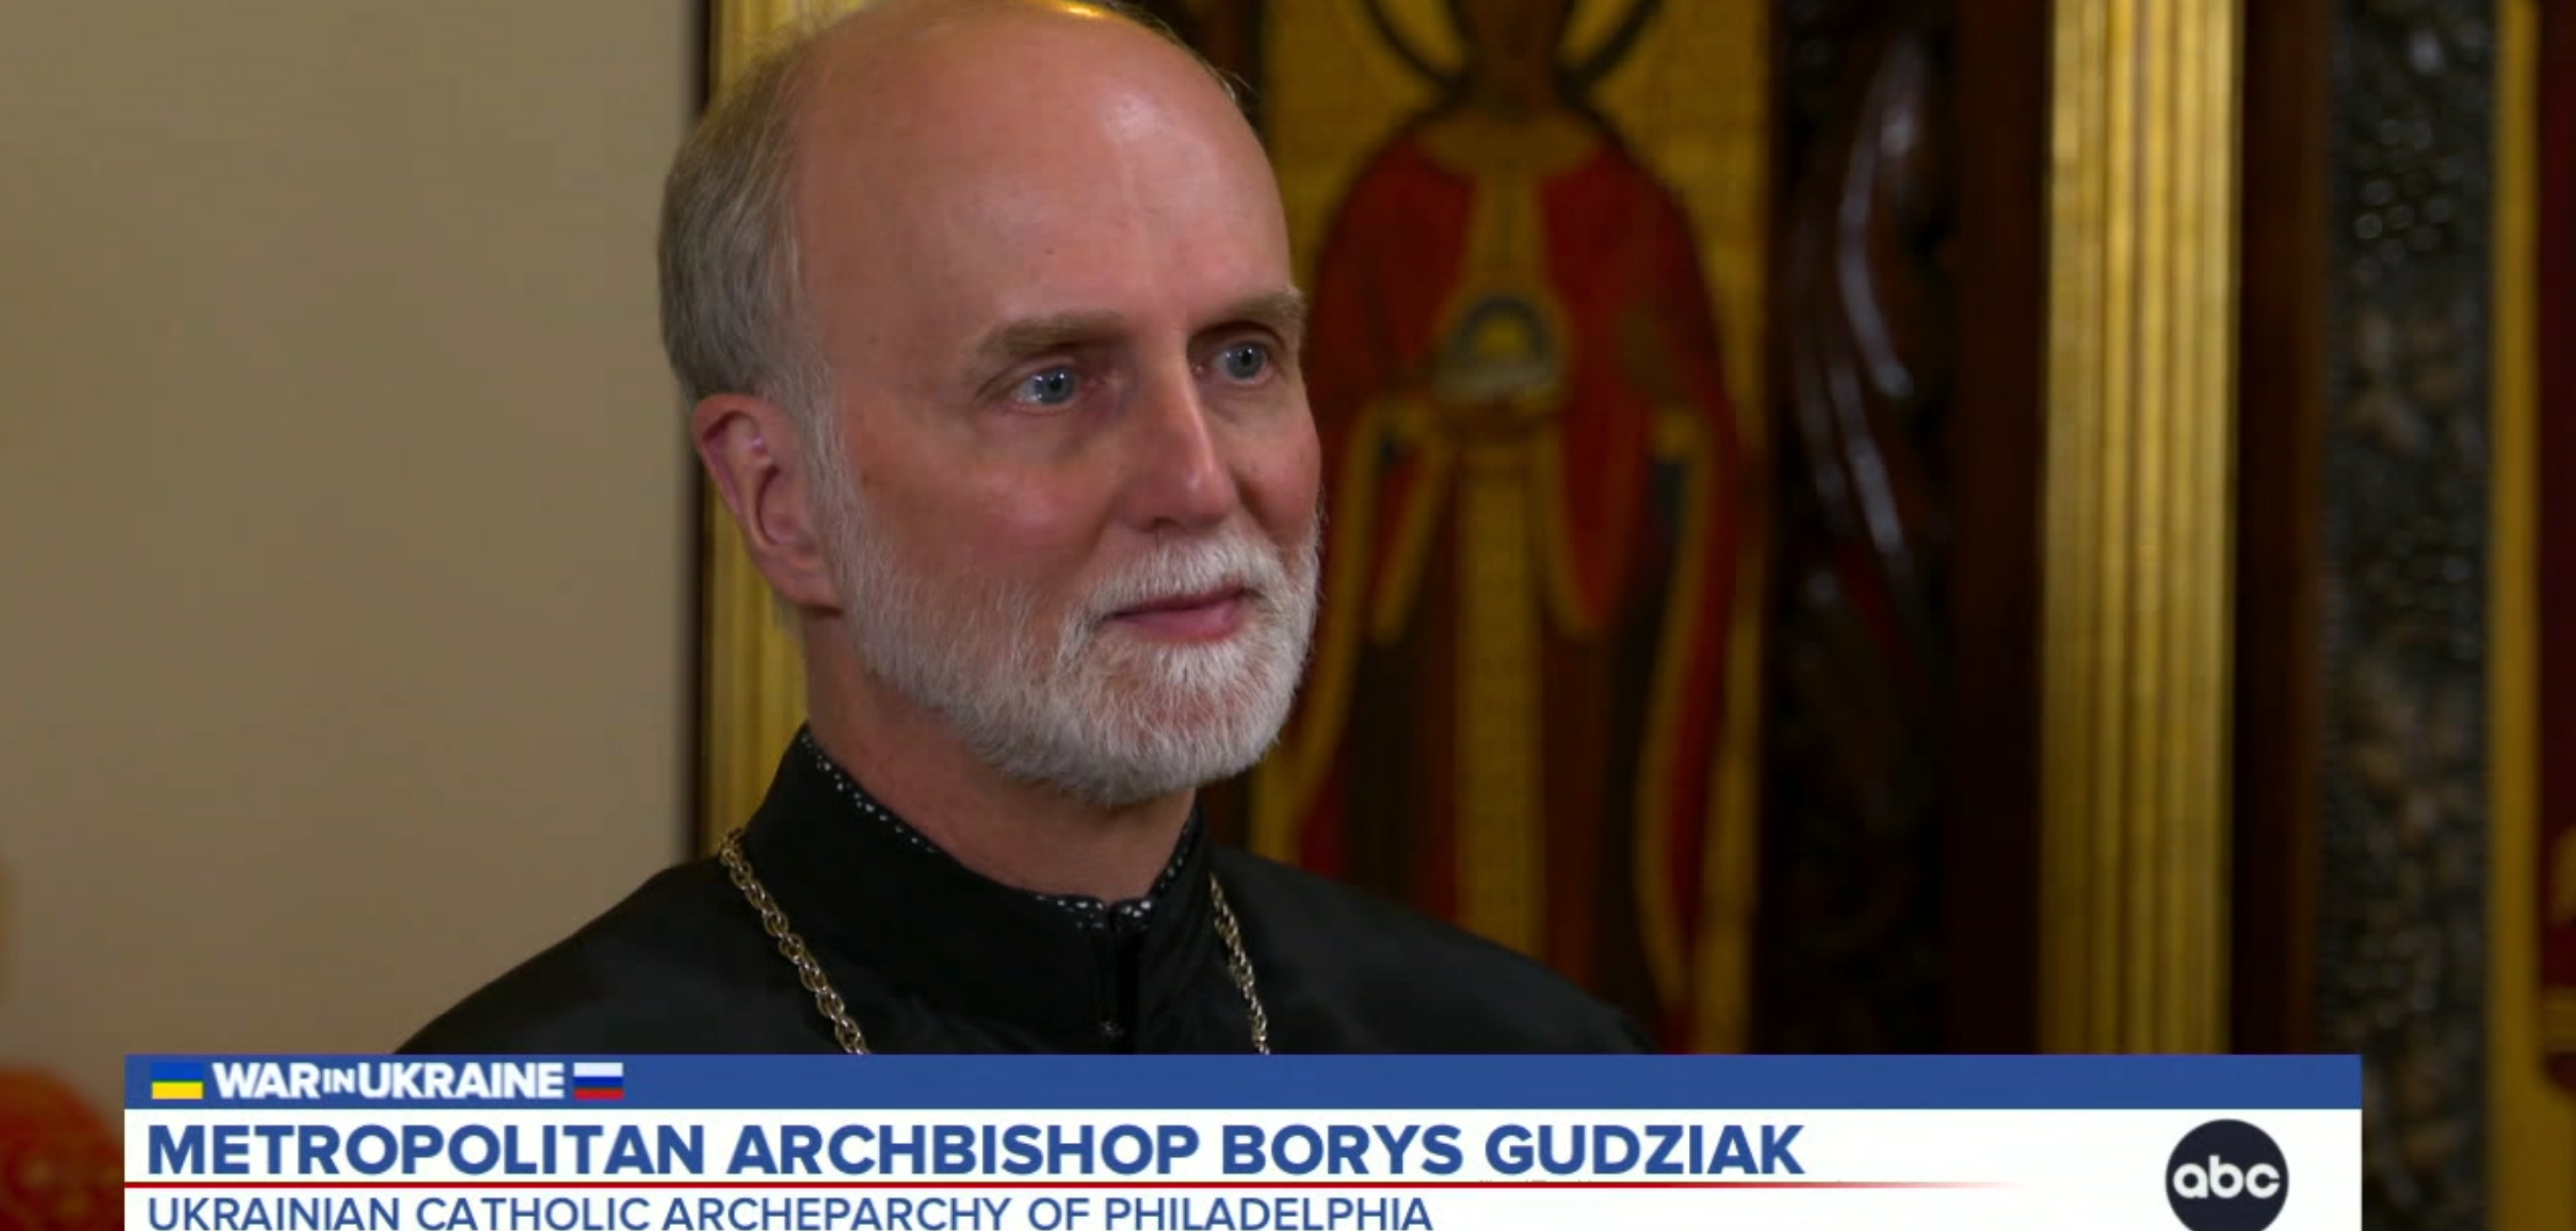 Bishop Borys Gudziak: Speaker Johnson has a heart, and he will do the right thing